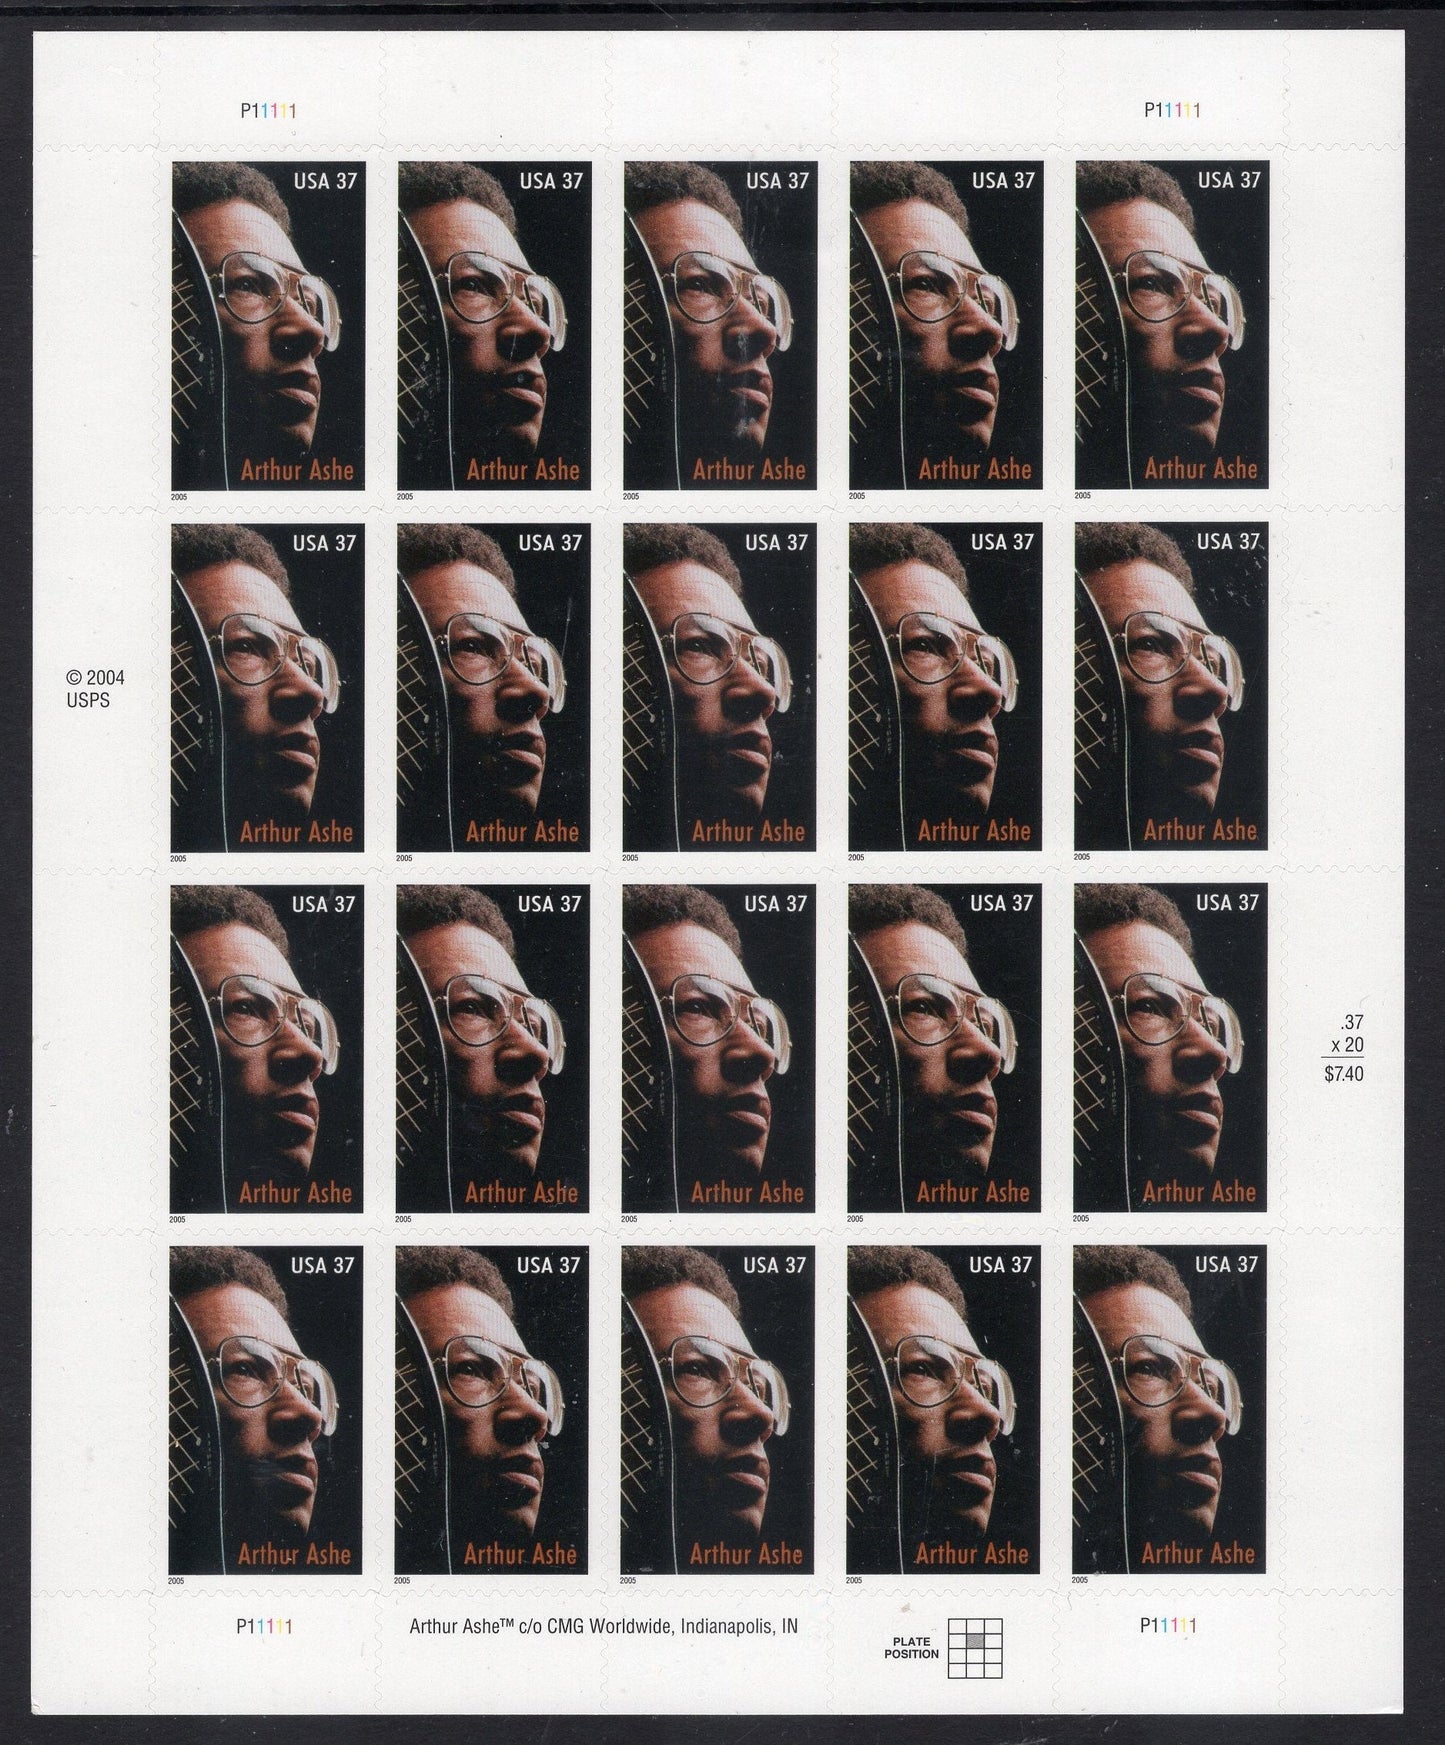 ARTHUR ASHE TENNIS Champion Sheet of 20 Black American Fresh Unused Fresh Bright USA Postage Stamps - Issued in 2005  - s3936-